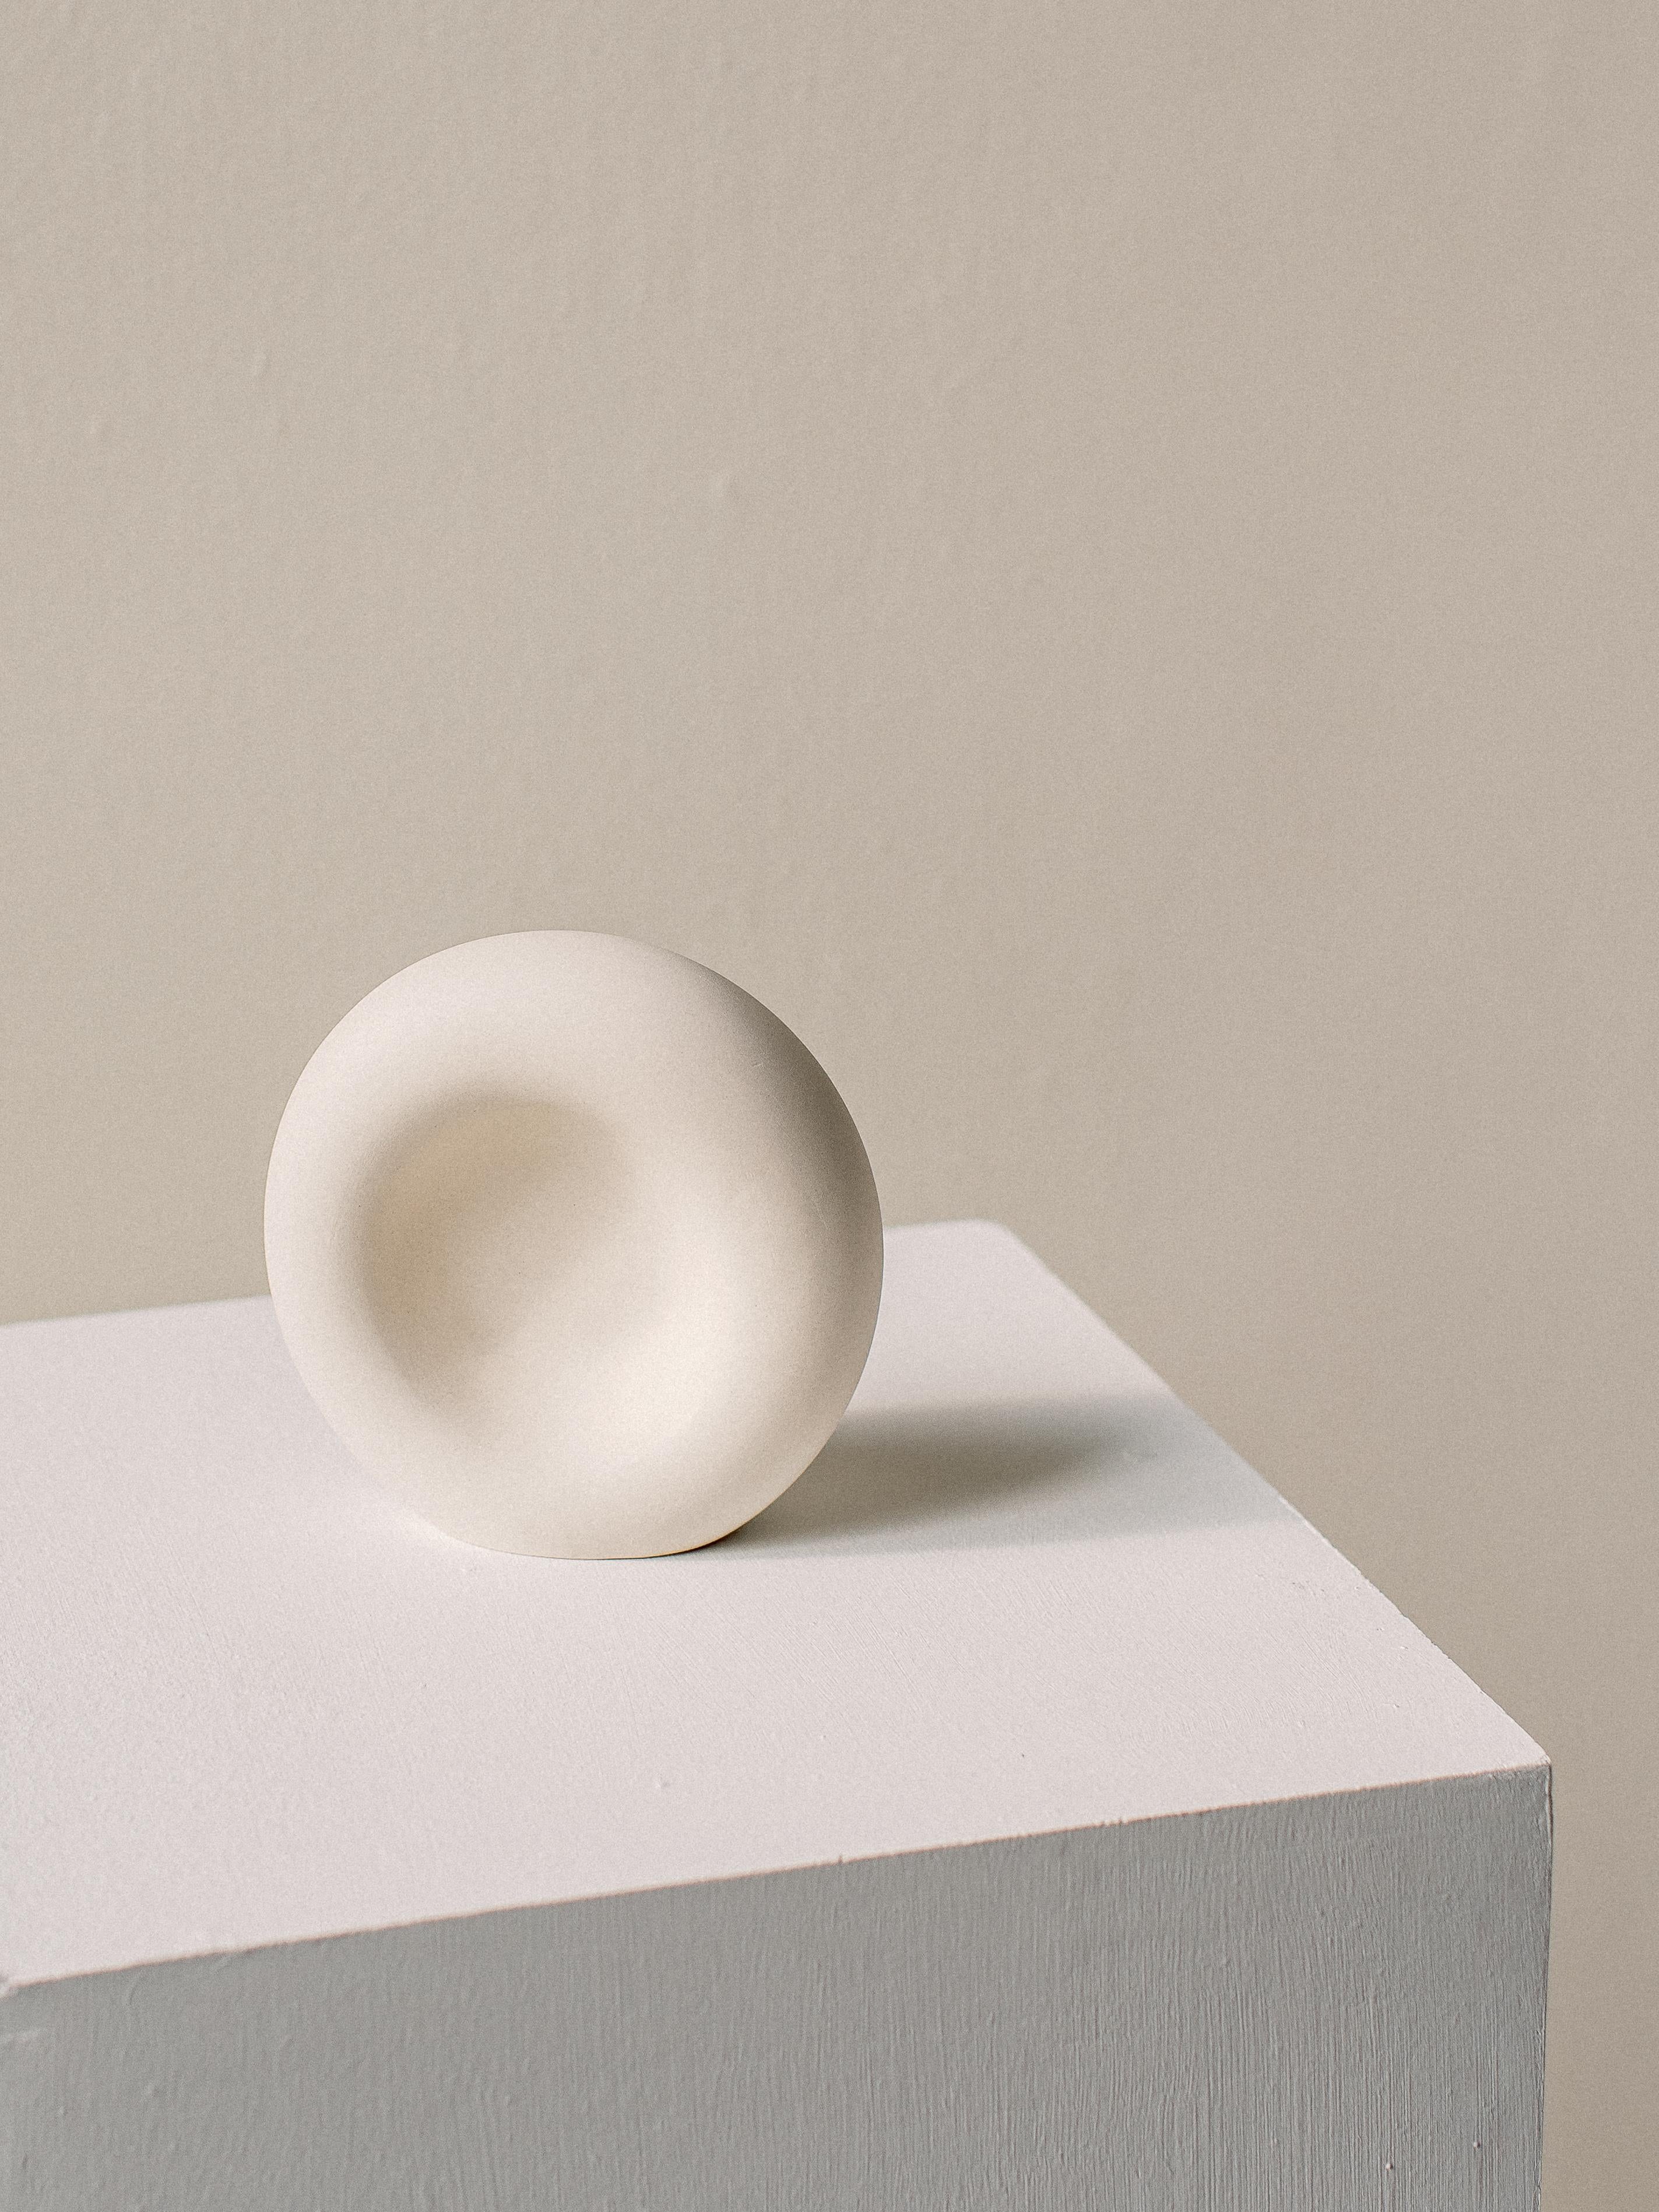 Unique listening form by Dust and Form
Dimensions: D 16.5 x 15 H cm
Materials: Porcelain

Origin Form Collection in three finishes: Hand-sanded (our classic, smooth, bare finish) Ivory (satin white glaze) Charcoal (matte black glaze). Please